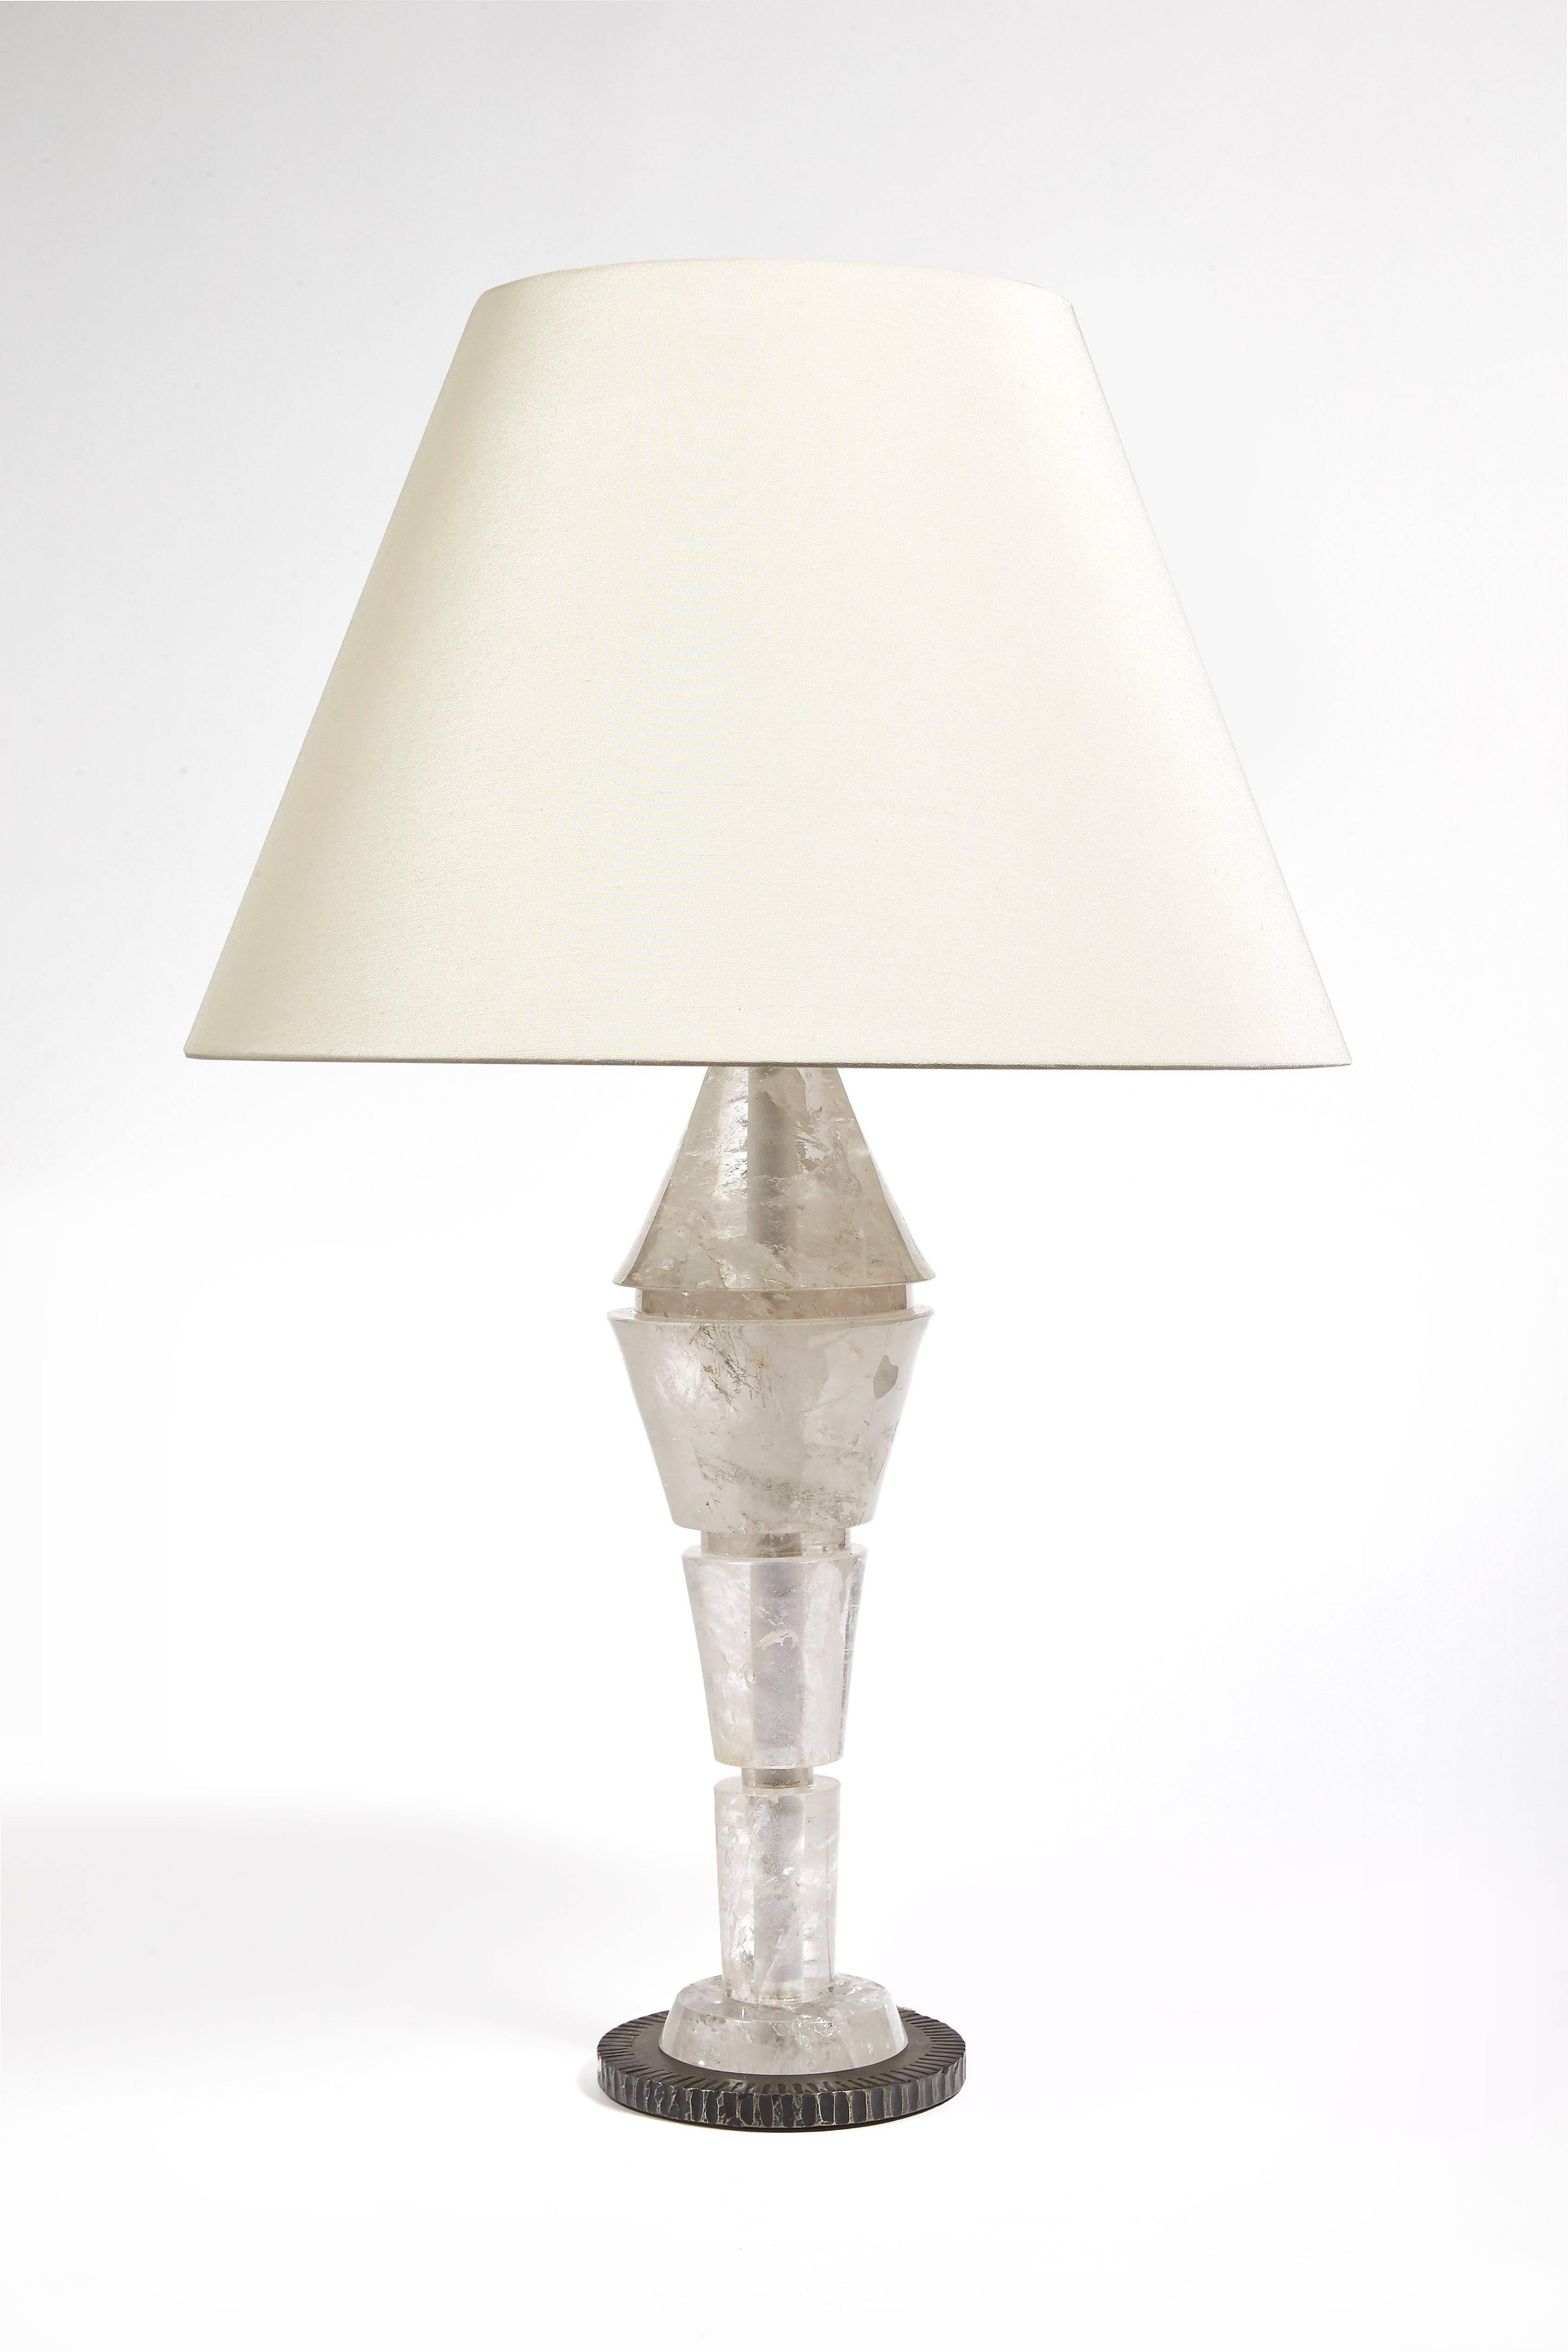 French Lamp, White Pagode Model by Sylvain Subervie, 2003